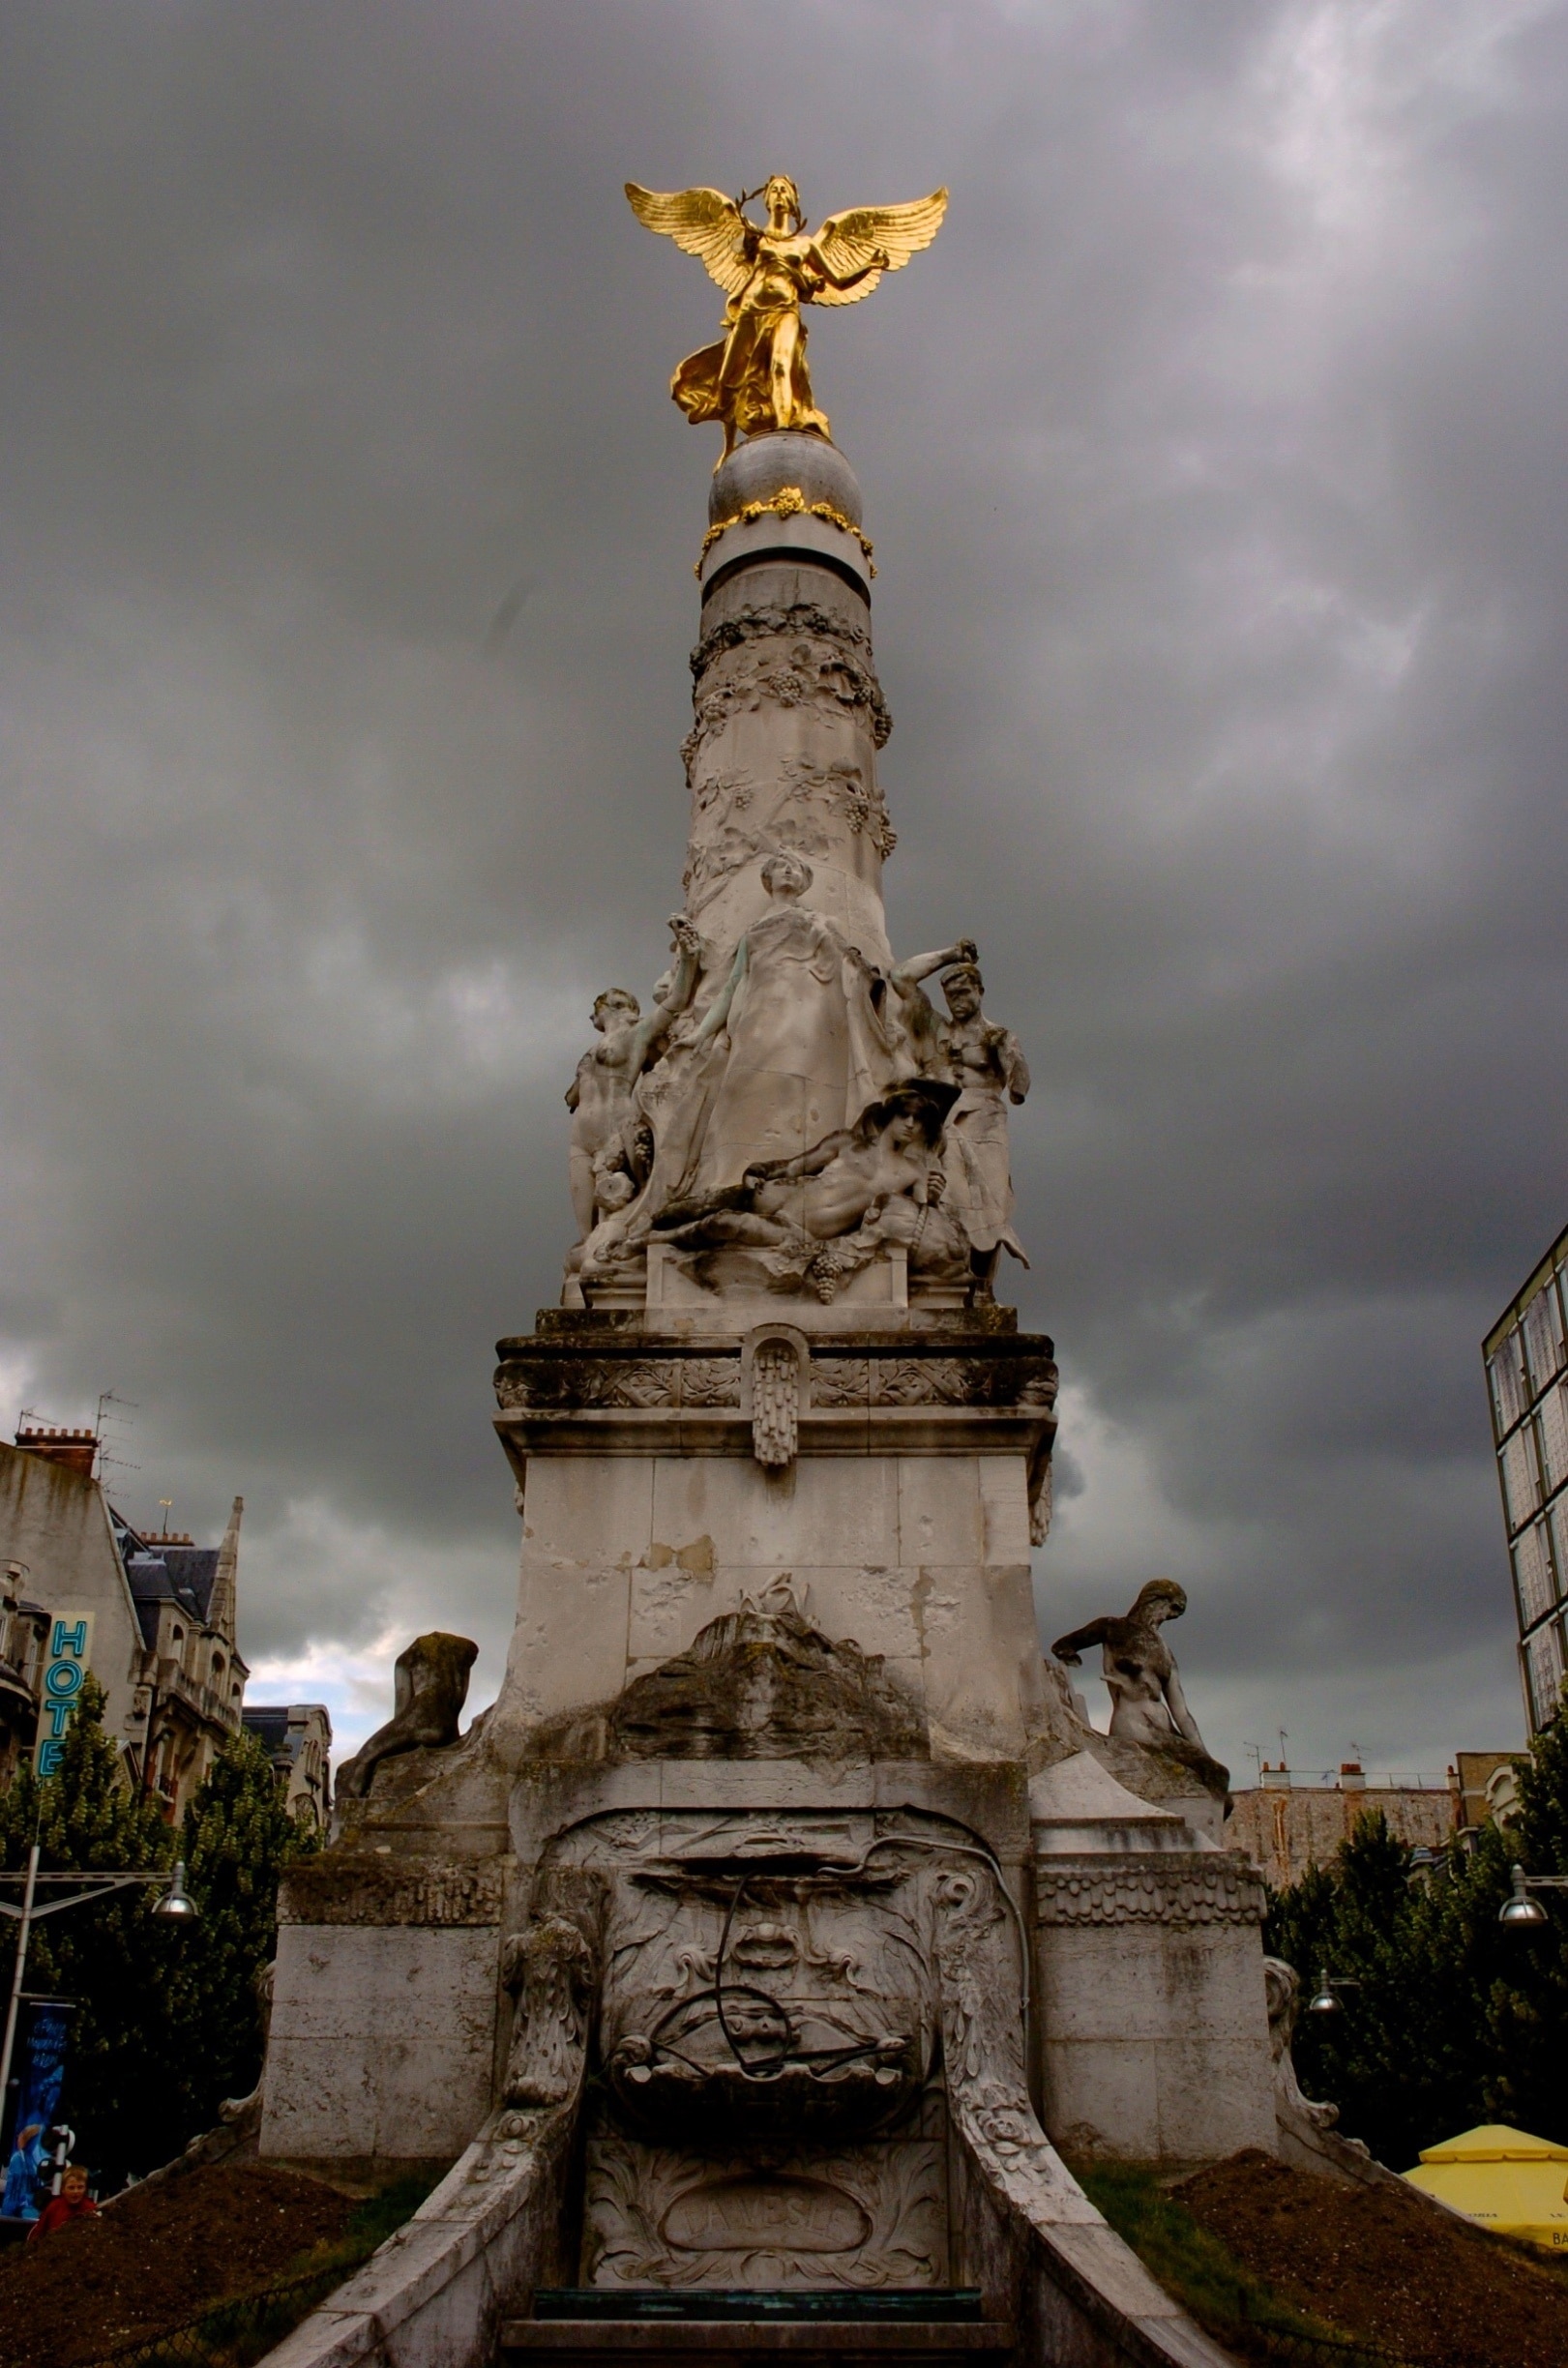 Inaugurated in 1906, the Subé Fountain stands 17 meters high. At its center is a crowned woman draped in cloth, symbol of Reims. Its construction required the removal of the statue of Marshall Drouet d’Erlon whose name was then attributed to the square. The fountain is named after Auguste Subé who donated 200,000 gold franks to the city to erect the monument.

During WWI, the Subé Fountain remained in tact whereas everything around it was completely destroyed. Today, the Subé Fountain is a veritable symbol of Reims along with the city’s cathedral and Smiling Angel statue.